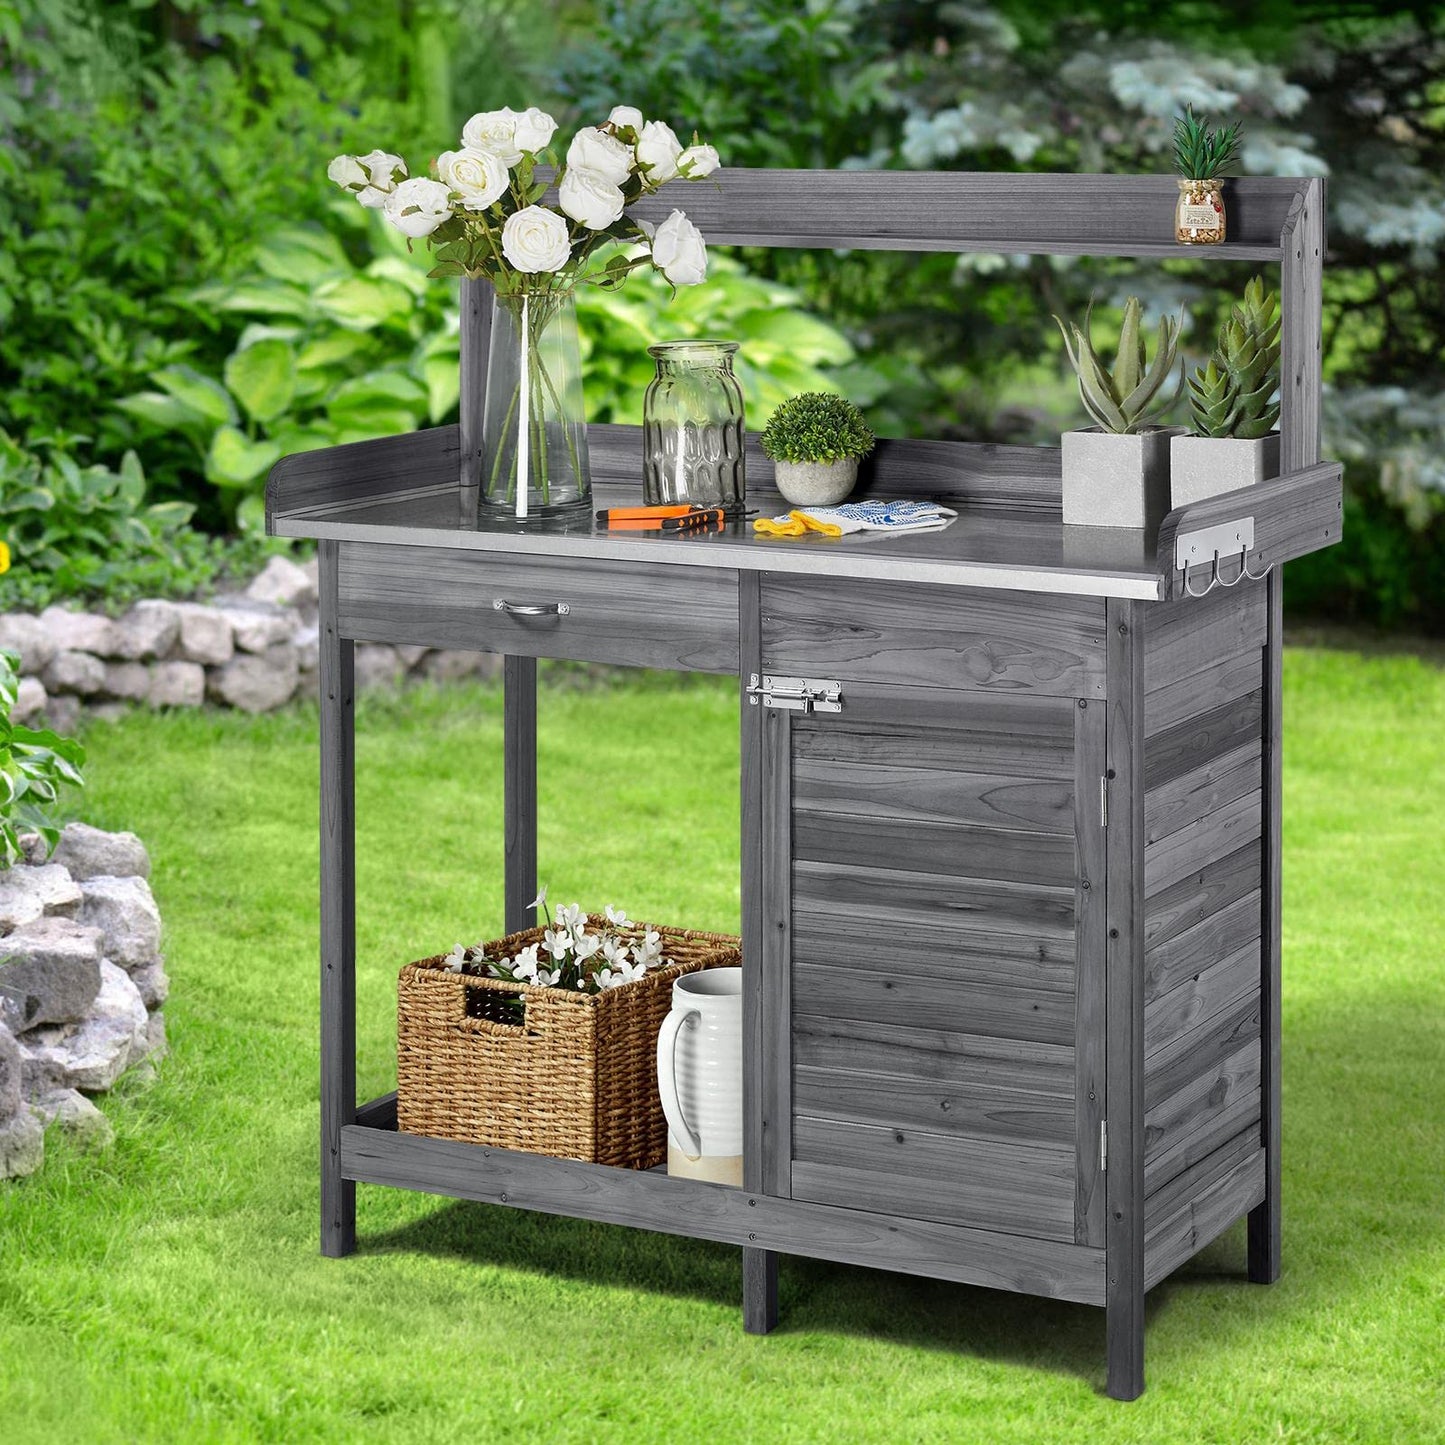 Boho Outdoor Potting Bench: Garden Workstation with Metal Tabletop and Handy Hooks - Perfect for Horticulture - Available in Various Colors!